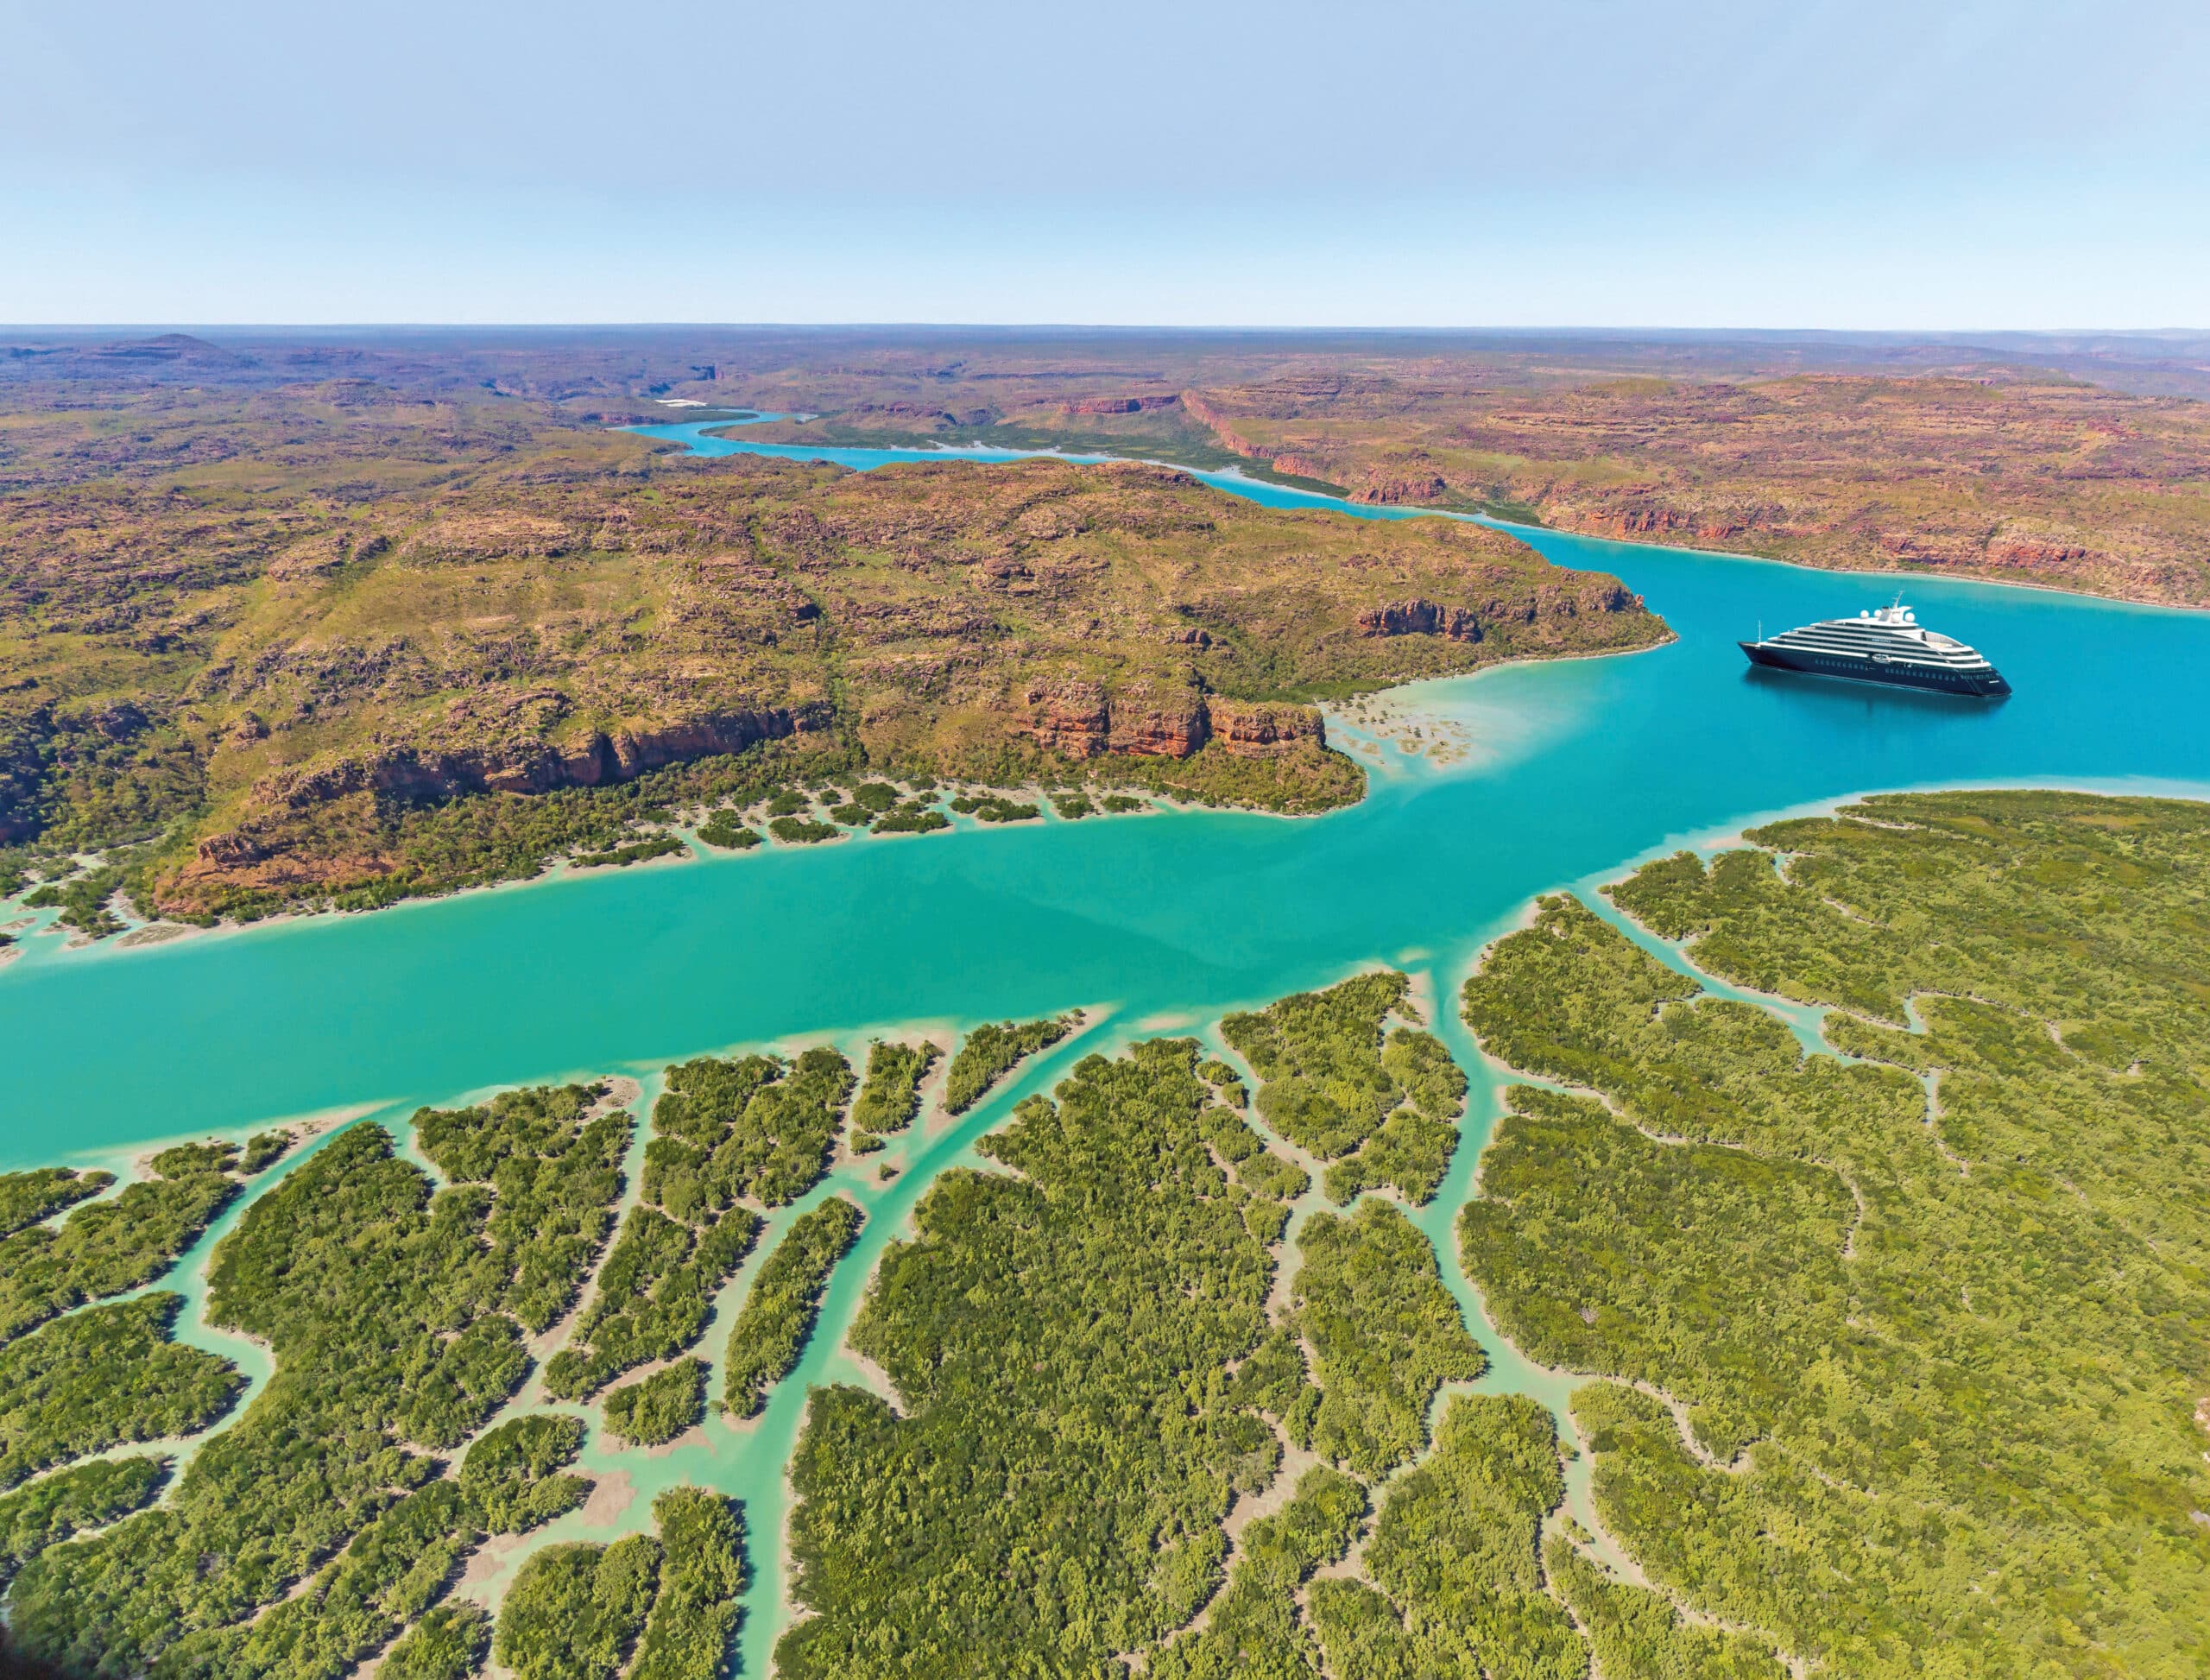 Scenic Eclipse II in Prince Frederick Harbour in the Kimberley Region